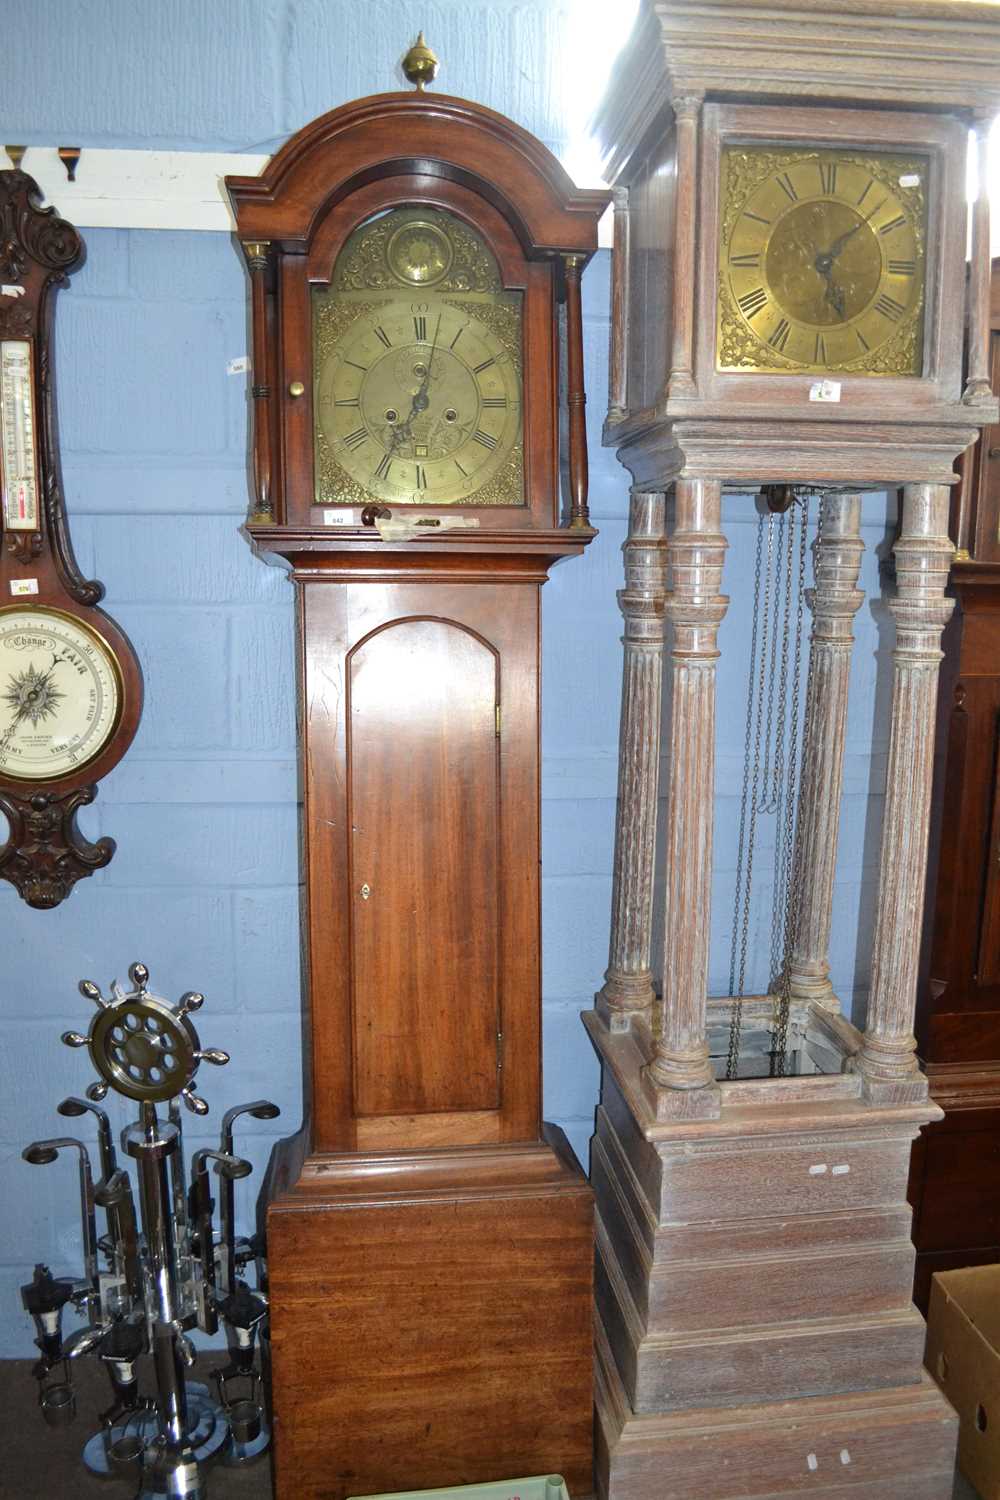 R Henderson, Scarborough (Yorkshire), a Georgian long case clock with arche brass dial with